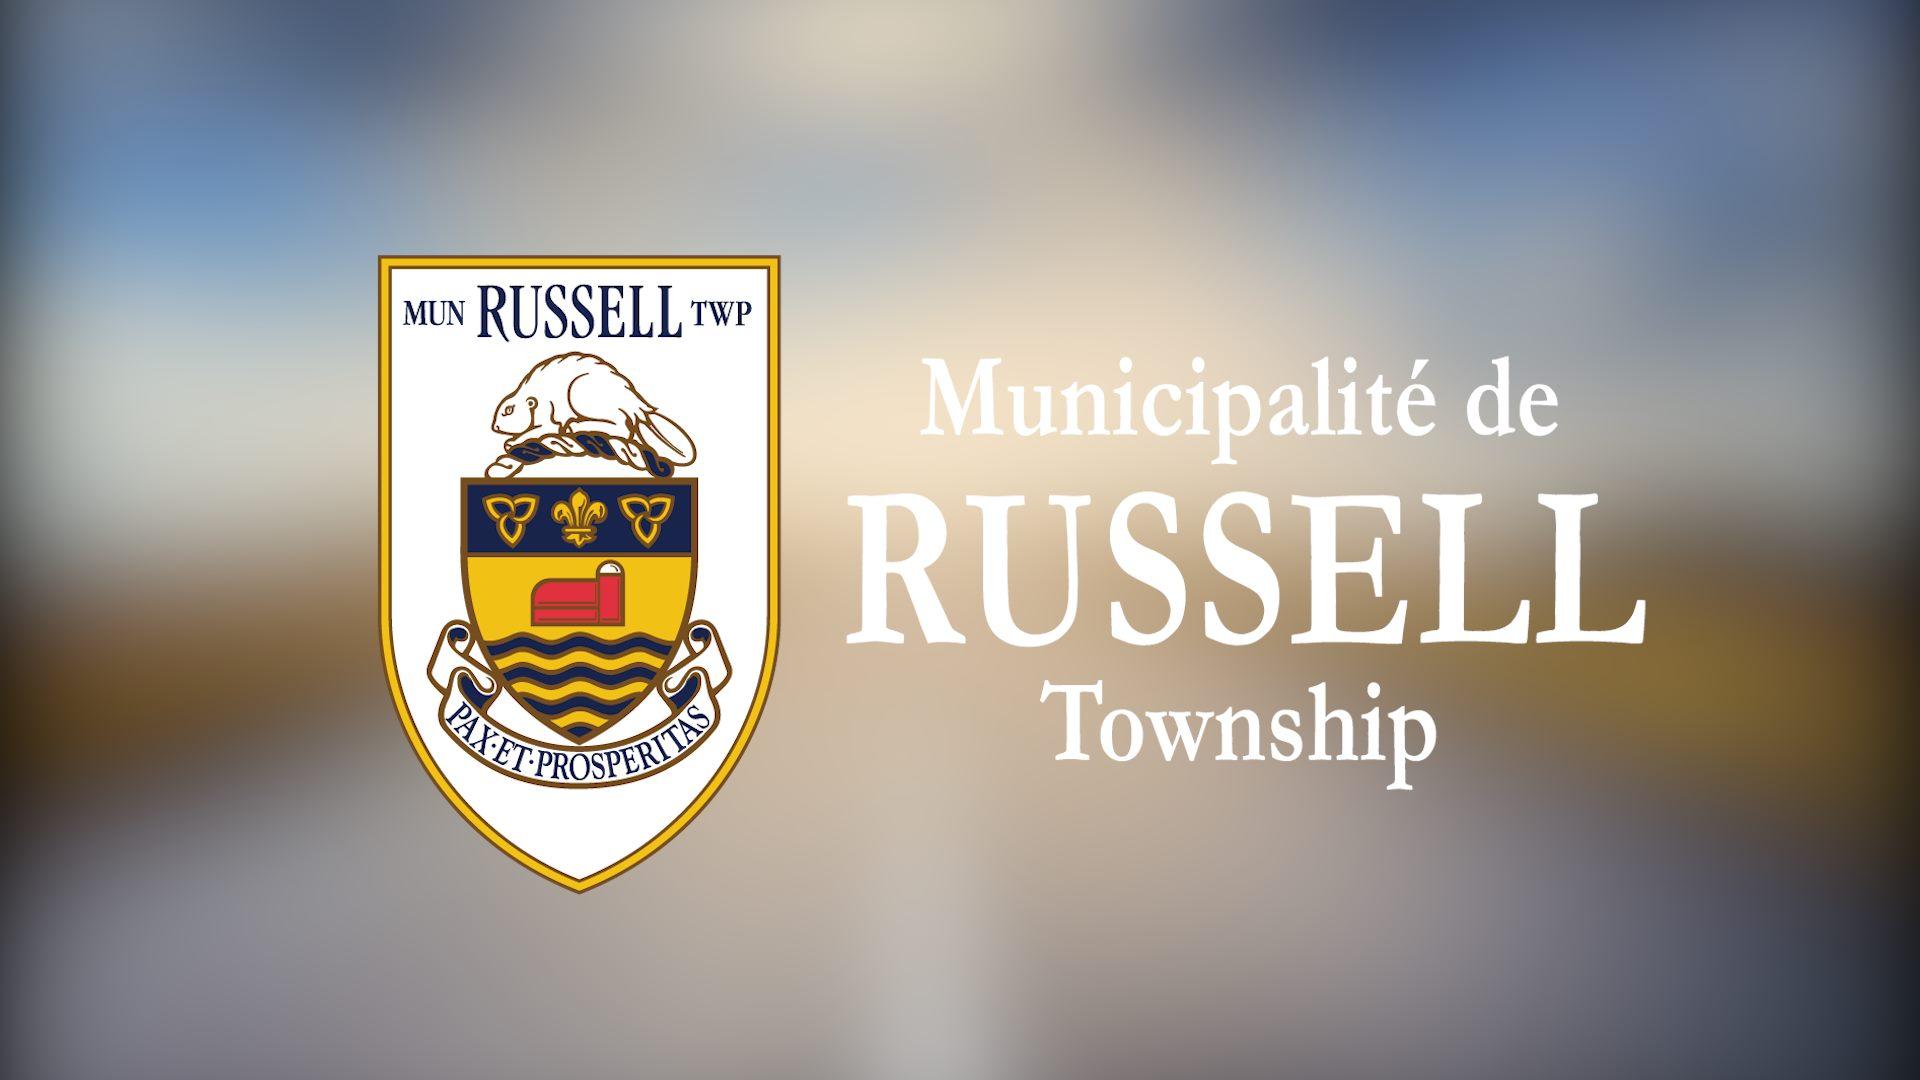 Nominations open for new Russell namesake